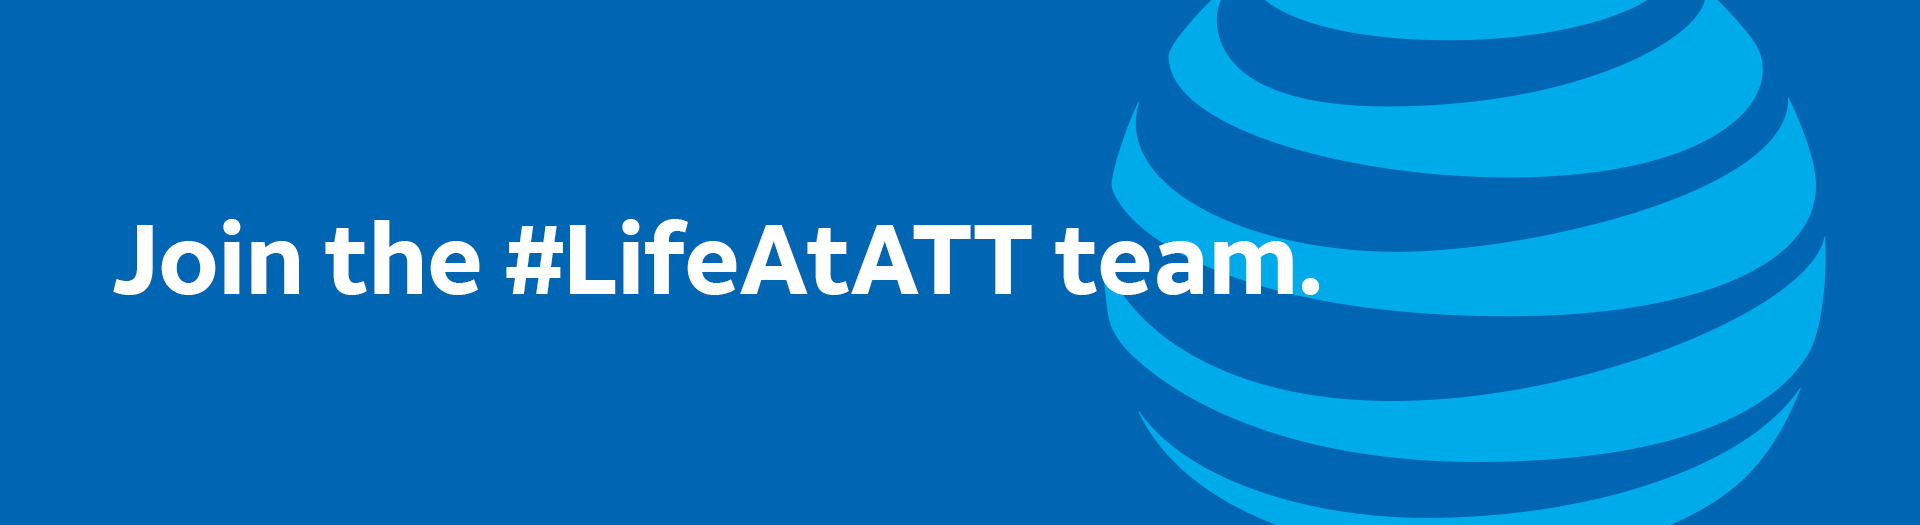 Join the #LifeAtAT&T team in front of the blue AT&T globe logo